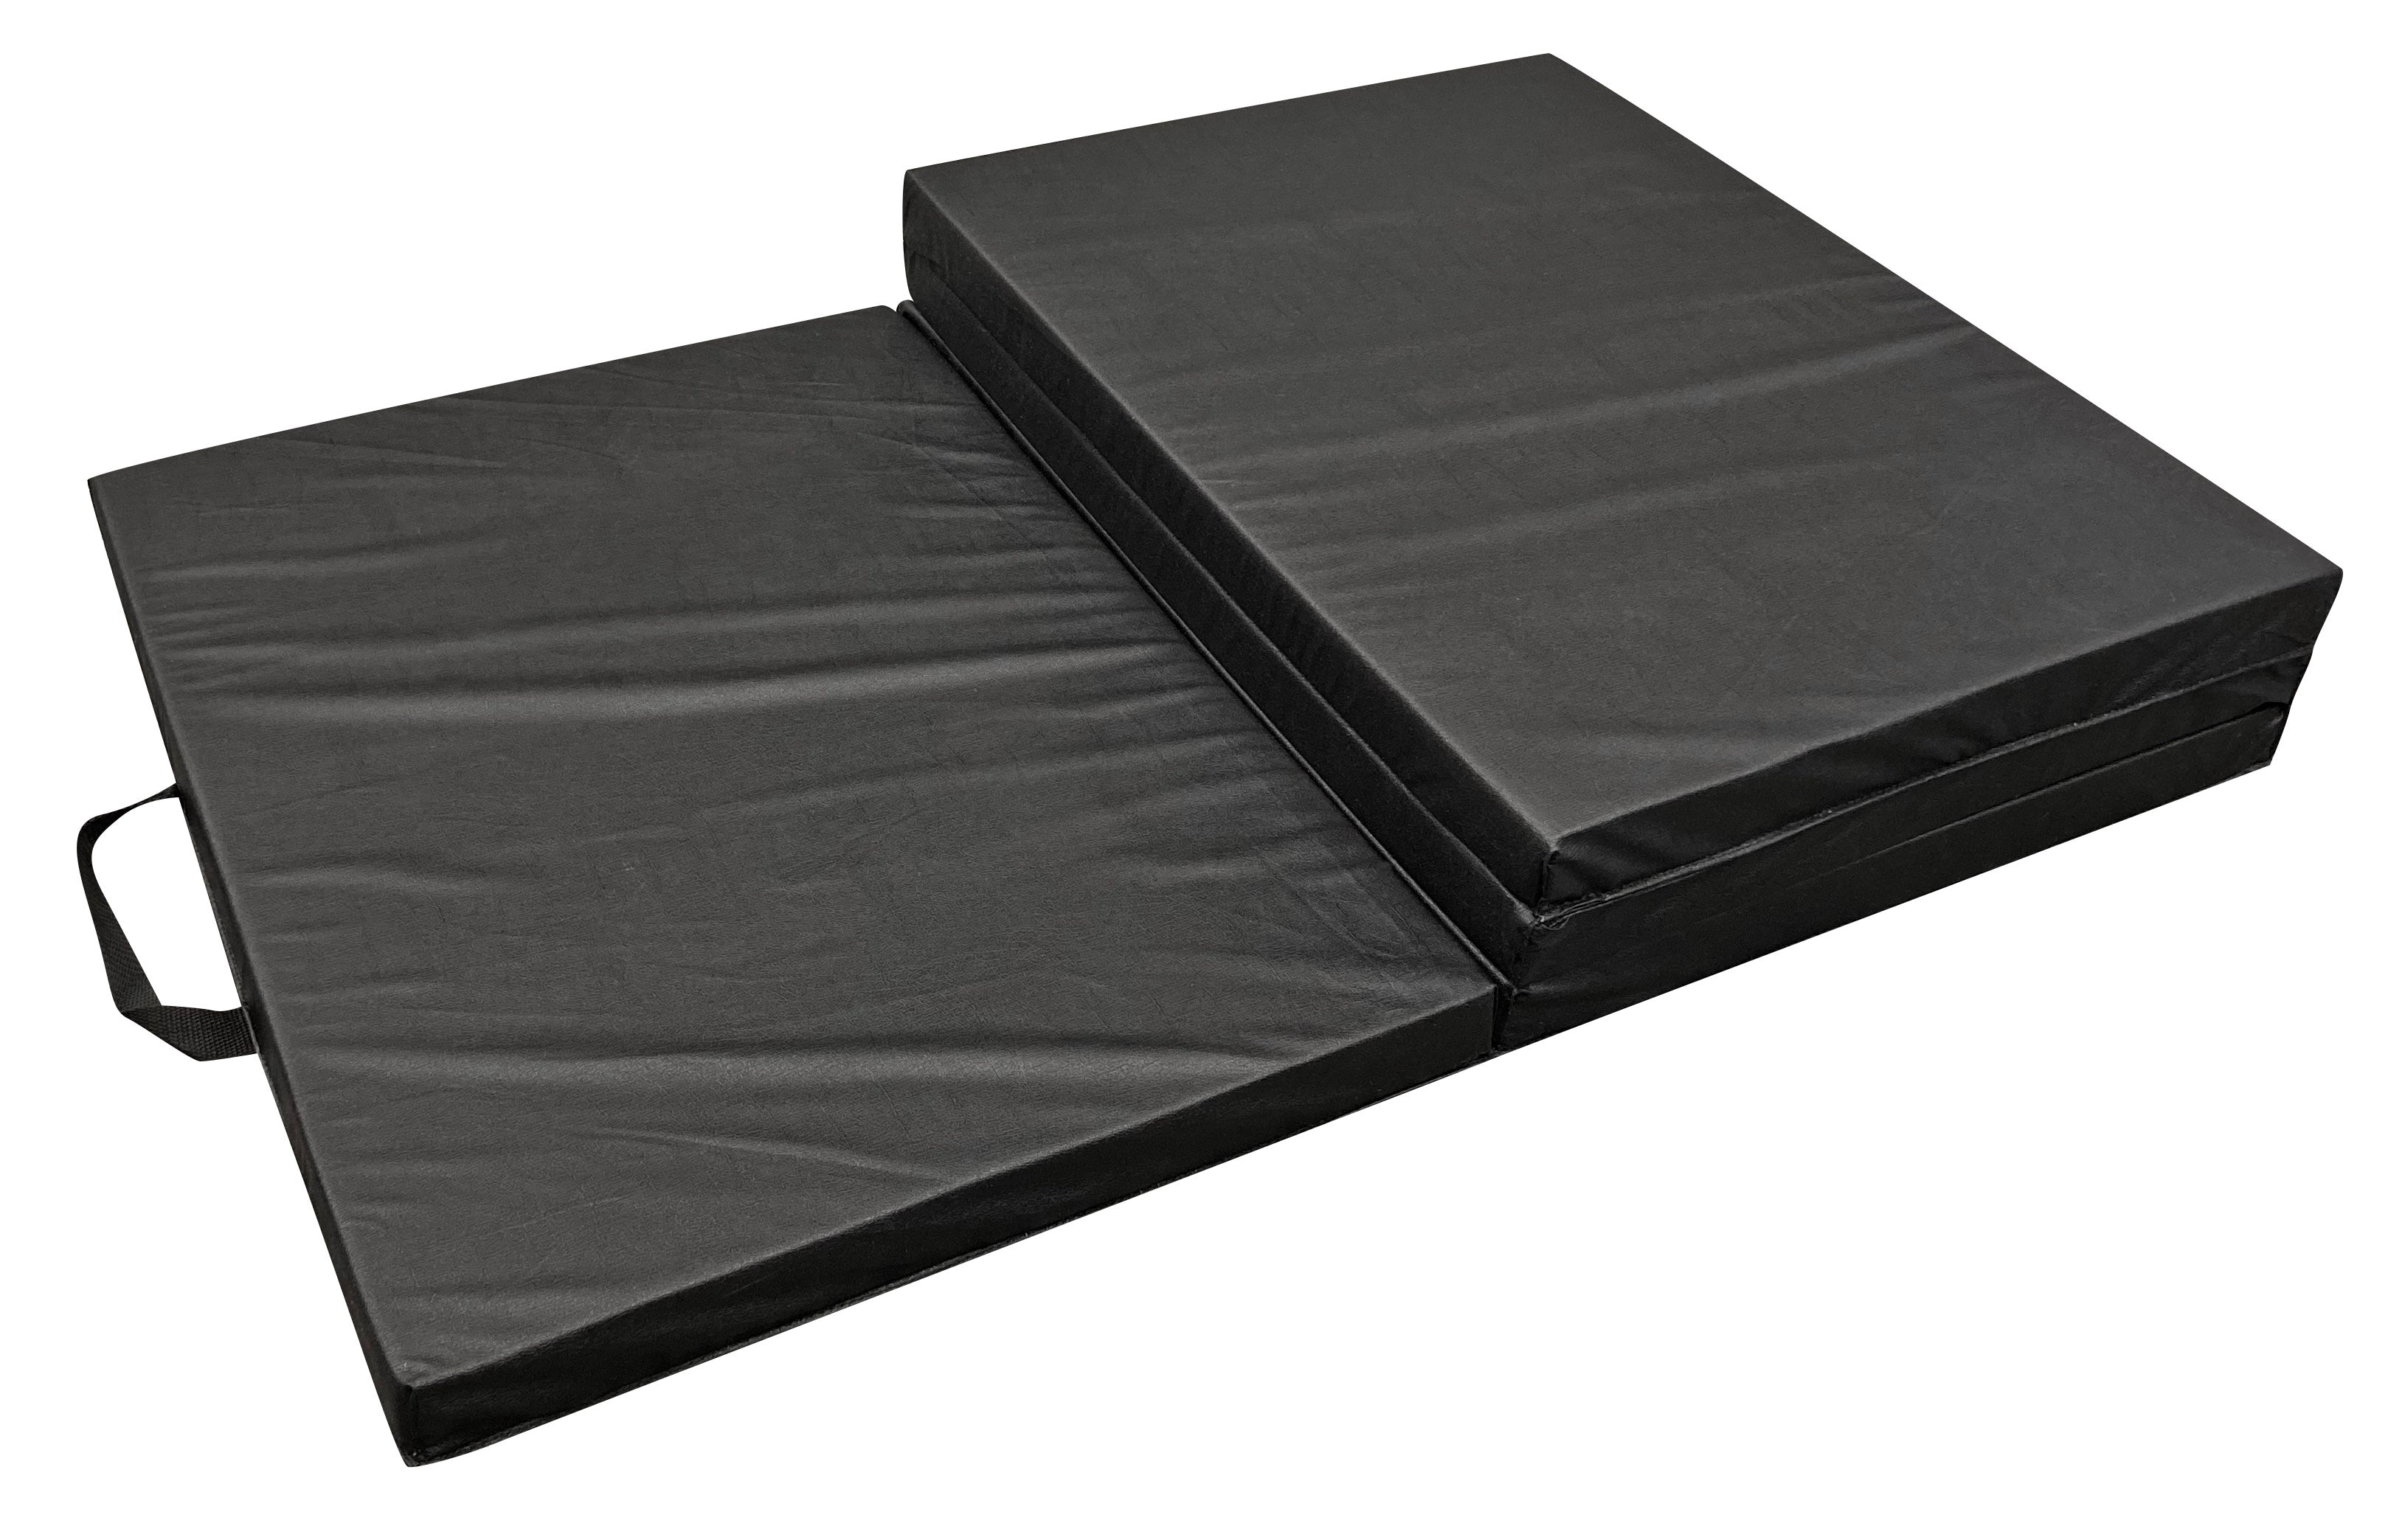 Pro-Lift C-5006 Foldable Mat Made from Heavy Duty Foam Great for Working in The Garage and Other